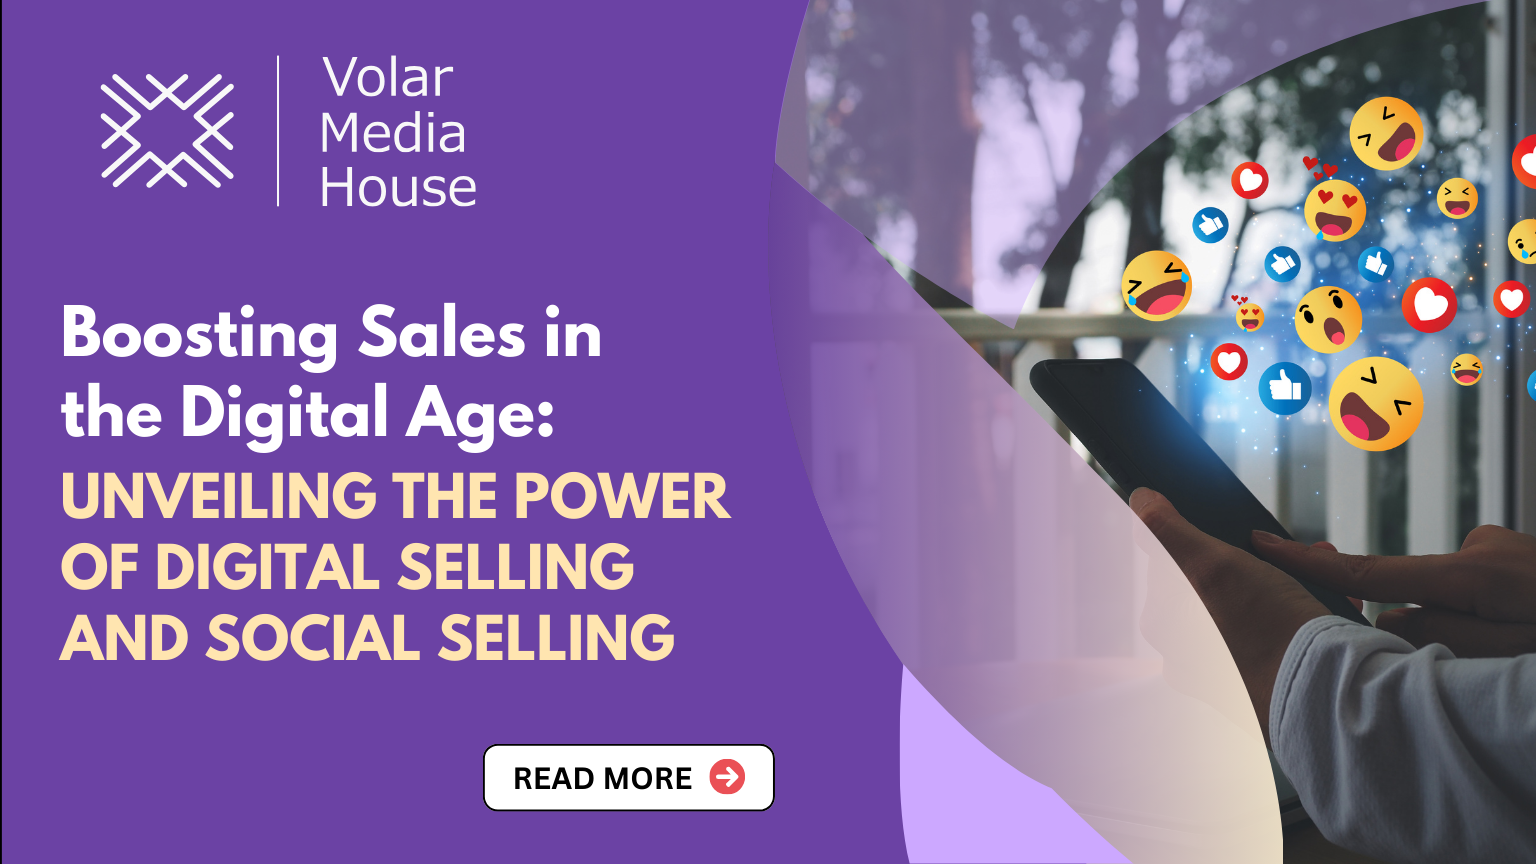 Boosting Sales in the Digital Age: Unveiling the Power of Digital Selling and Social Selling  